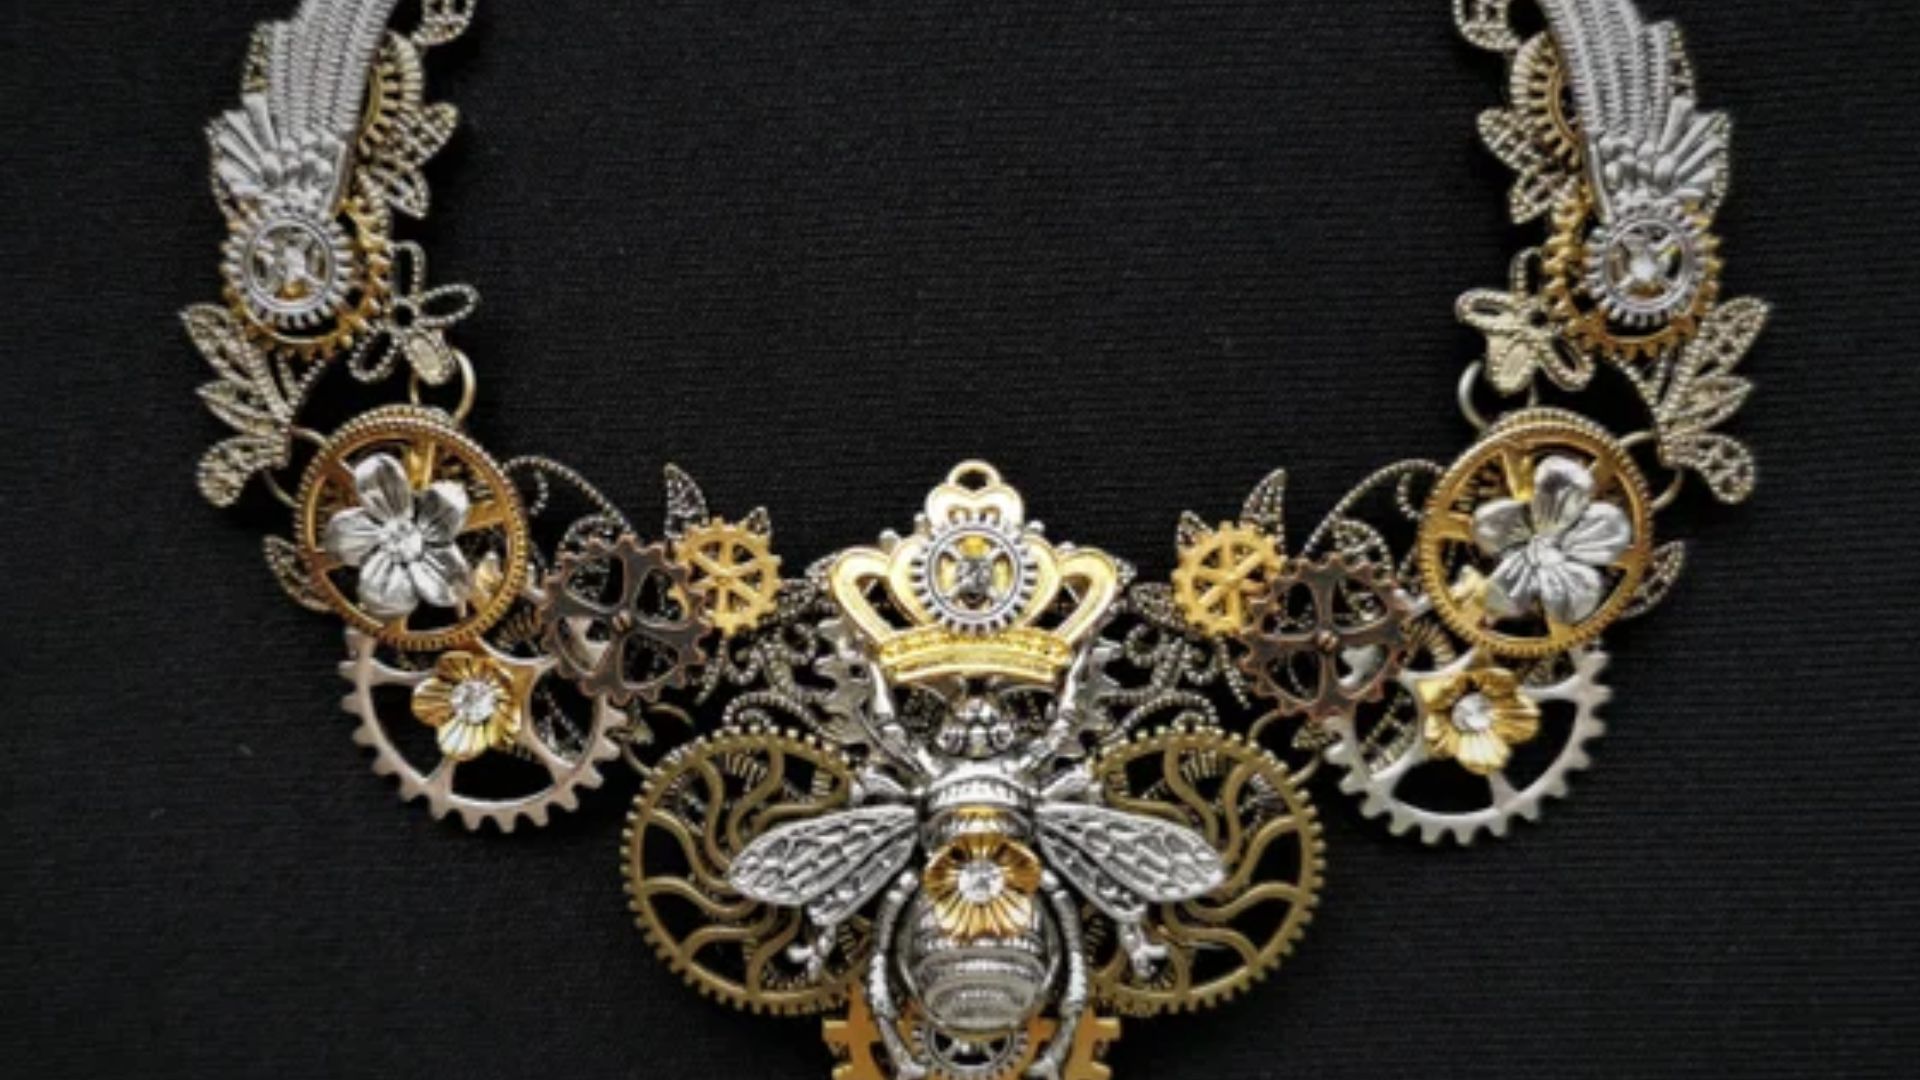 Steampunk Silver Jewelry - A Unique And Intriguing Genre Of Jewelry